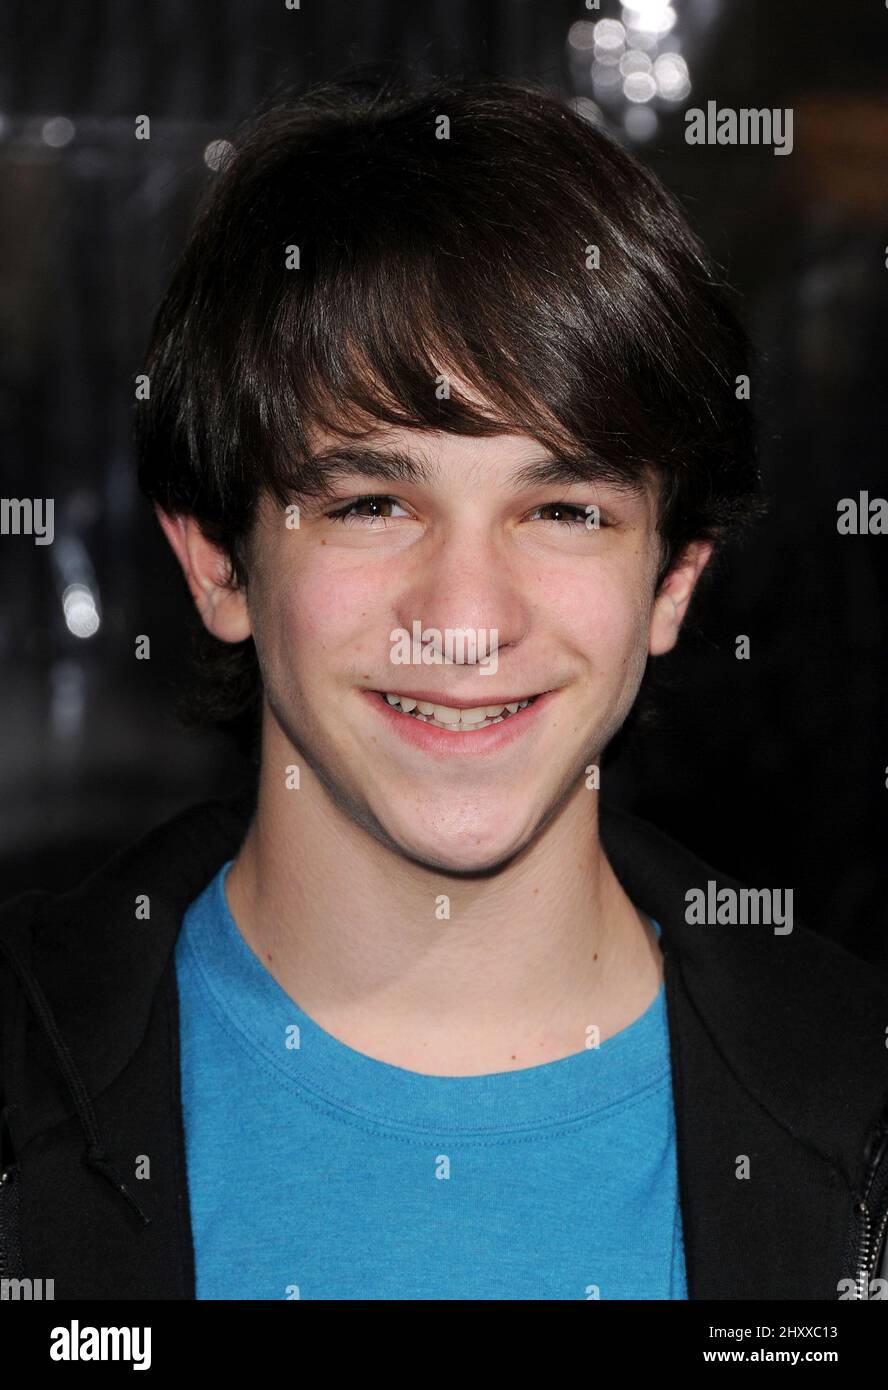 Zachary Gordon During The Man On A Ledge Los Angeles Premiere Held At